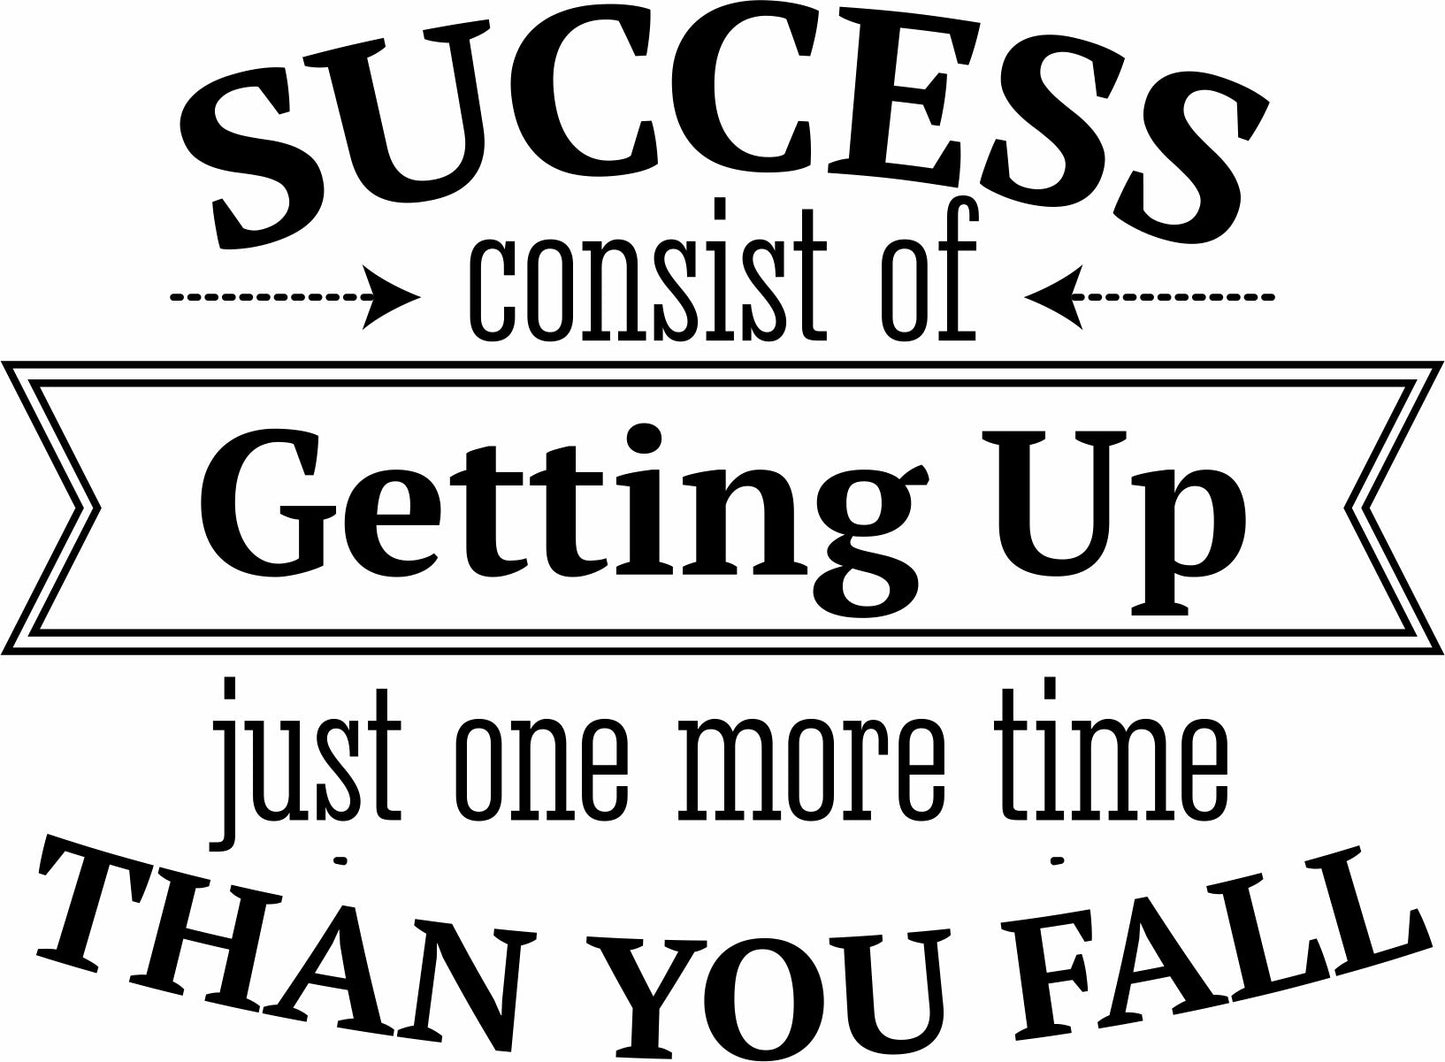 Success consists of getting up decal